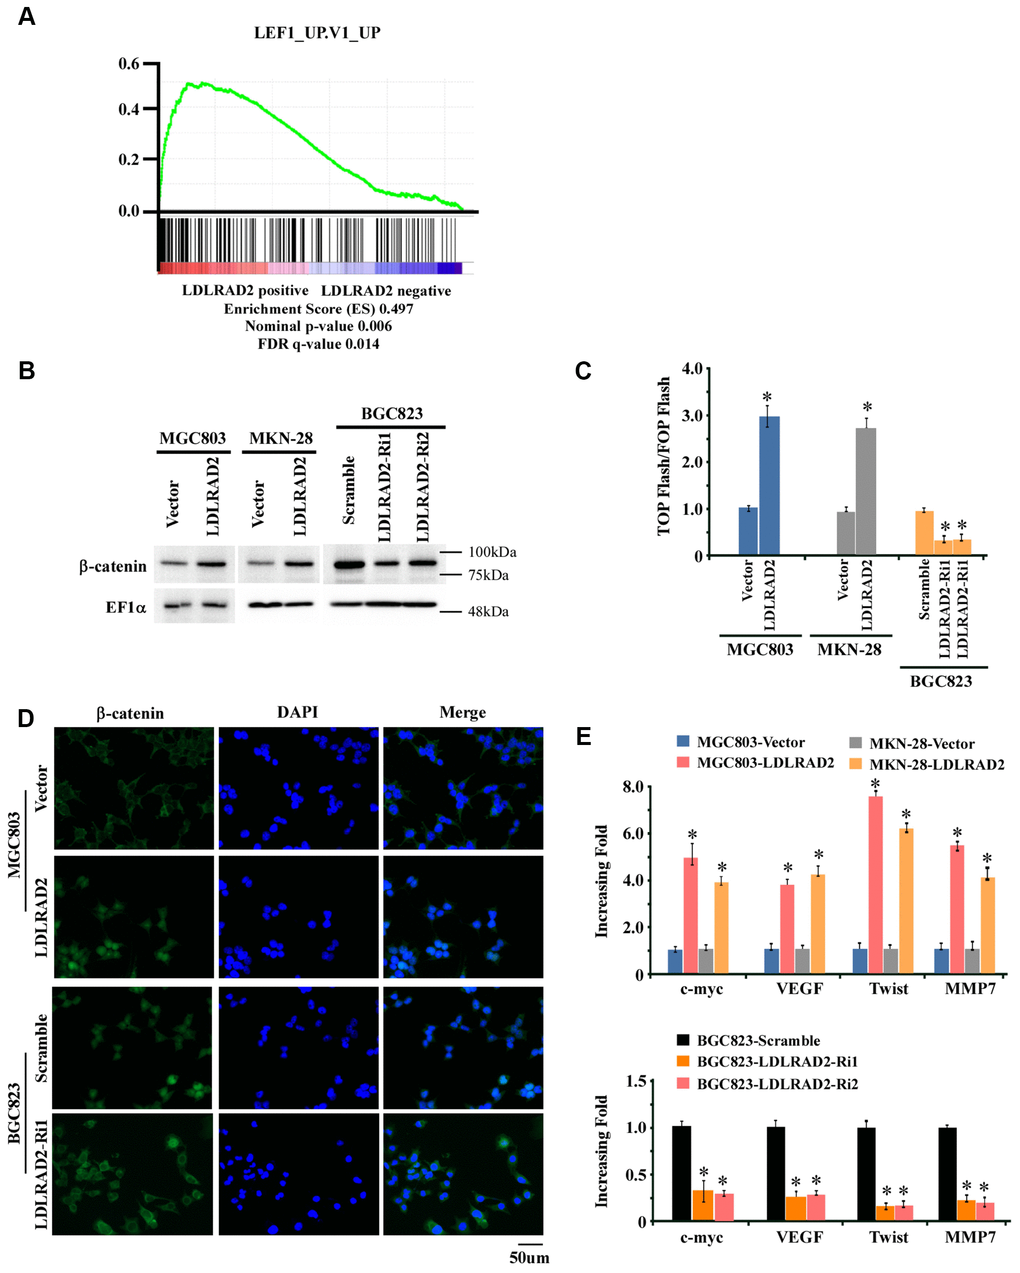 LDLRAD2 activates Wnt/β-catenin signaling pathway in GC. Gene-set enrichment analysis (GSEA) indicated that LDLRAD2 expression was closely associated with Wnt/β-catenin pathway (A). Western blotting analysis showed that overexpression of LDLRAD2 significantly increased the nuclear expression of β-catenin, while silence of LDLRAD2 dramatically decreased the nuclear expression of β-catenin in GC cell lines (B). Top/Fop flash assay also demonstrated that overexpression of LDLRAD2 significantly activated Wnt/β-catenin signaling pathway, while silence of LDLRAD2 dramatically restrained Wnt/β-catenin signaling pathway (C). Immunofluorescence assay also showed that LDLRAD2 could promote the nuclear distribution of β-catenin in GC cells (D). Overexpression of LDLRAD2 significantly promoted the expression of downstream genes of Wnt/β-catenin signaling including c-myc, VEGF, Twist, and MMP7, while silence of LDLRAD2 inhibited the expression of these genes (E).